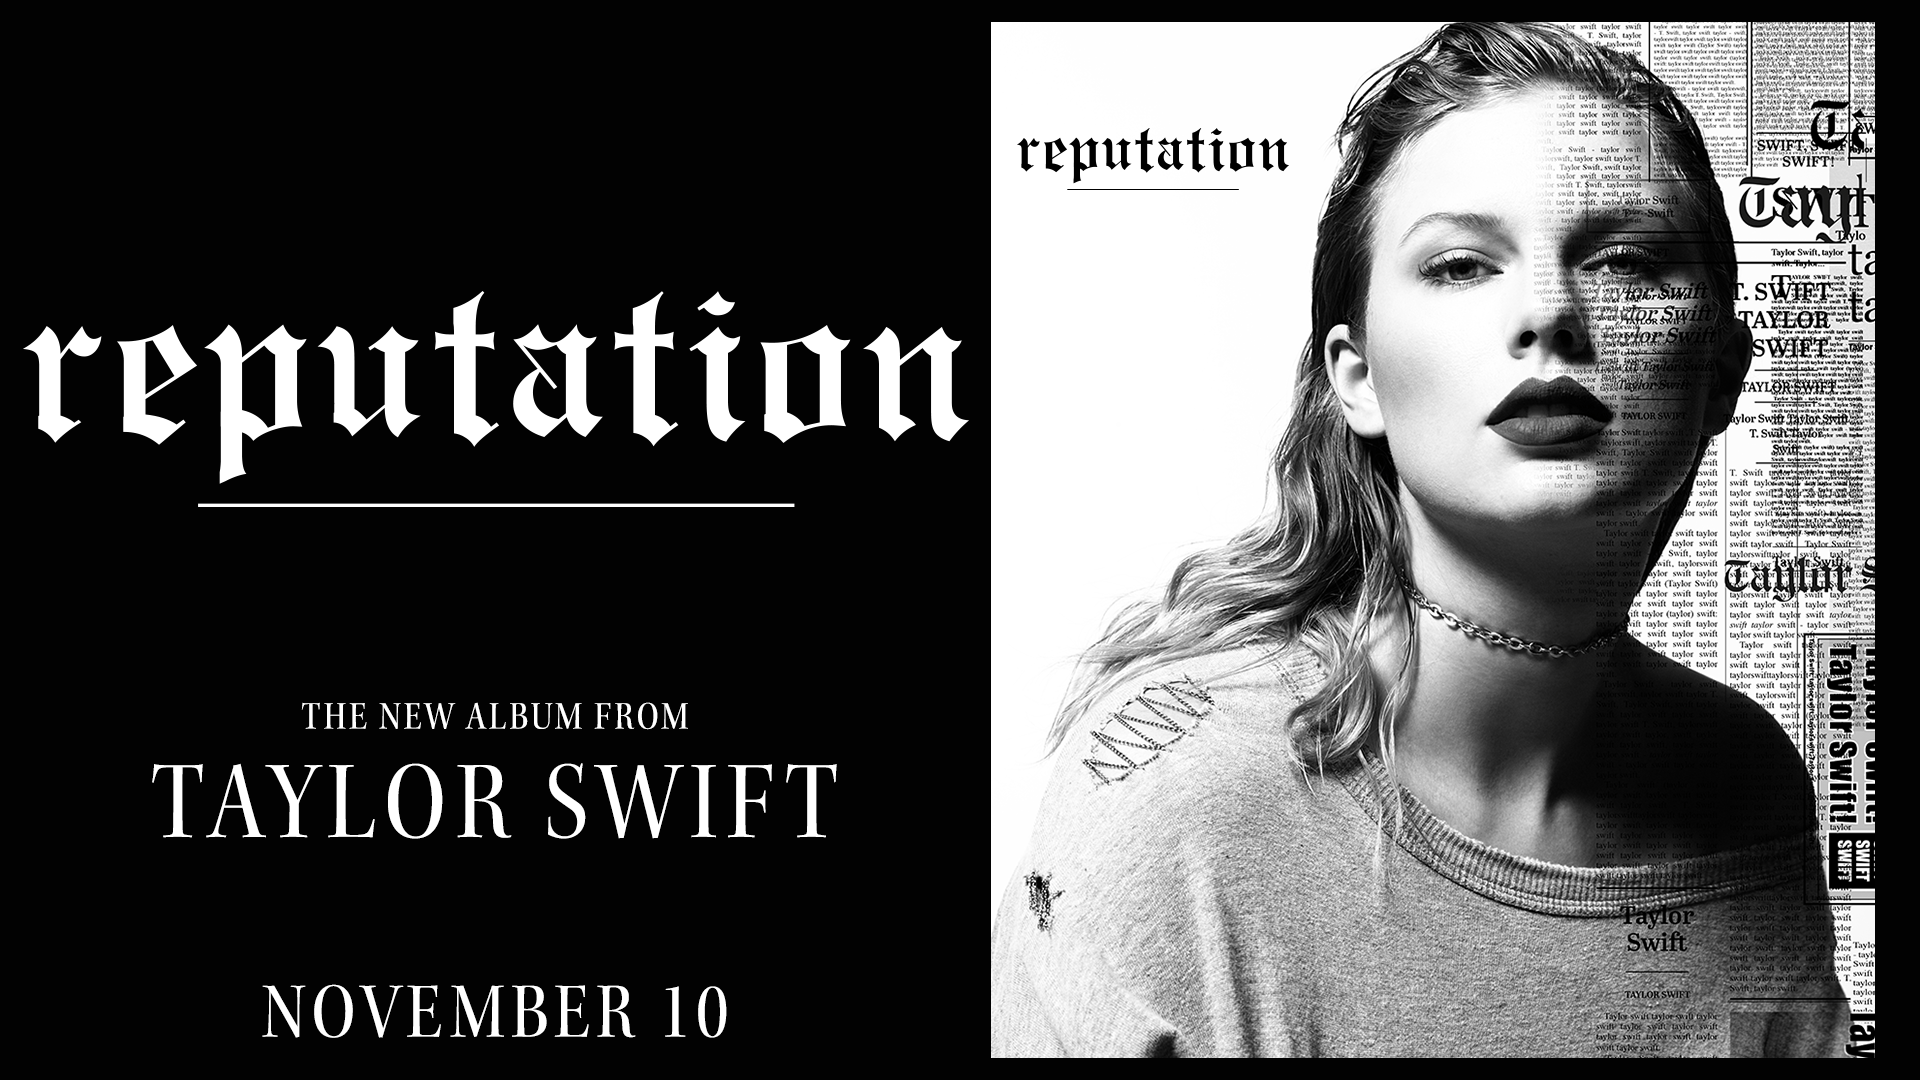 ts locks read pinned on Twitter simple reputation tour Taylor Swift  lockscreenwallpaper  if you use please give credit  httpstcooUzWyy3co5  Twitter